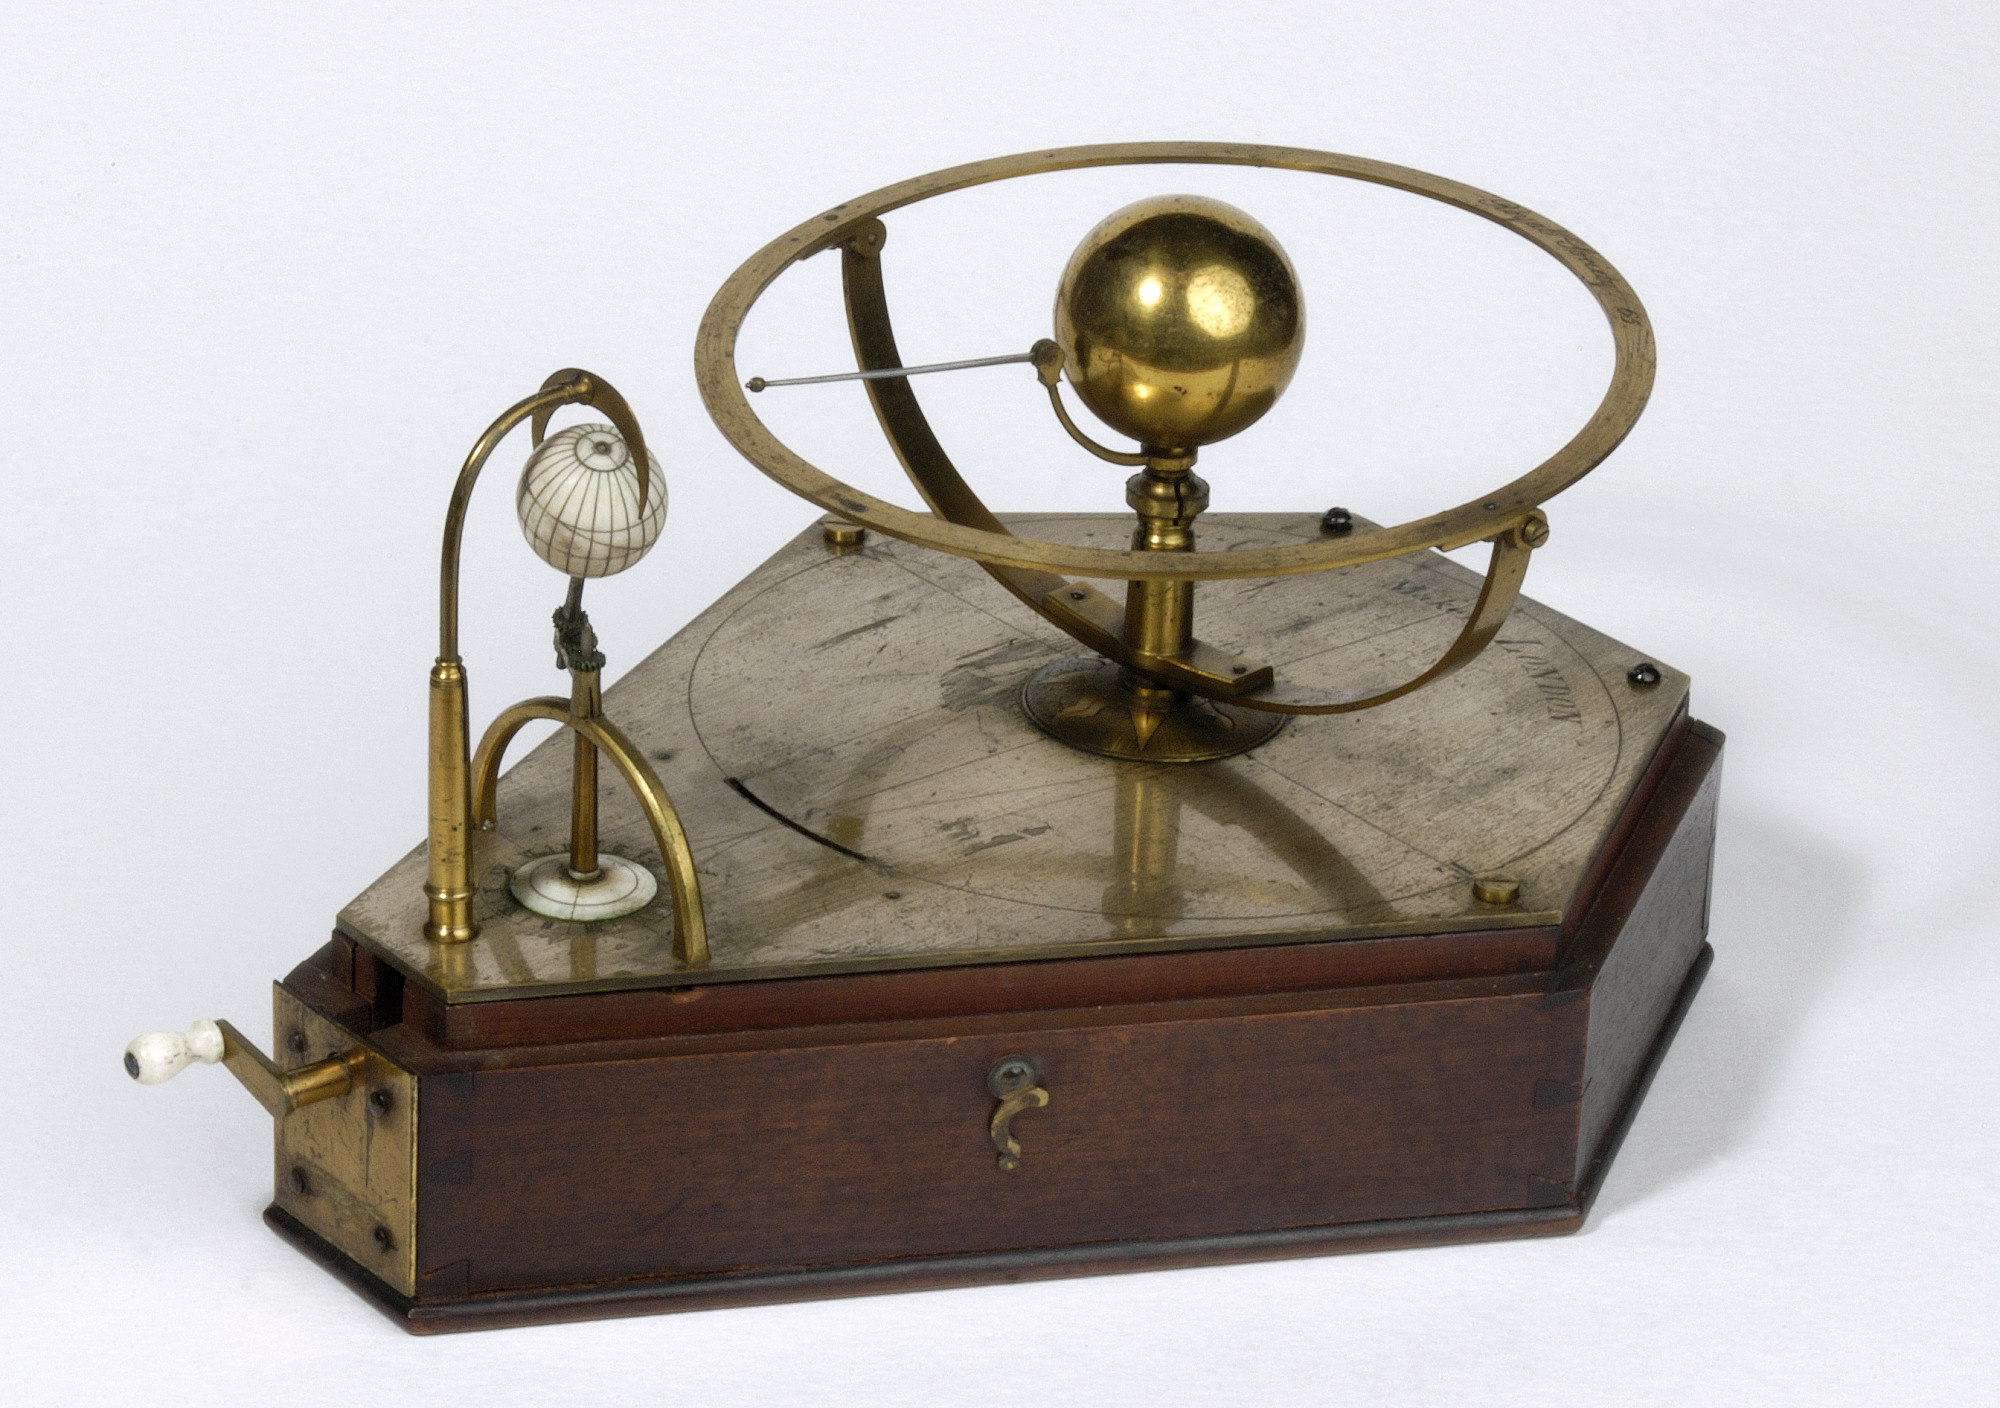 Orrery (mechanical planetarium) demonstrating the transit of Venus, about 1760, made by Benjamin Cole, London.